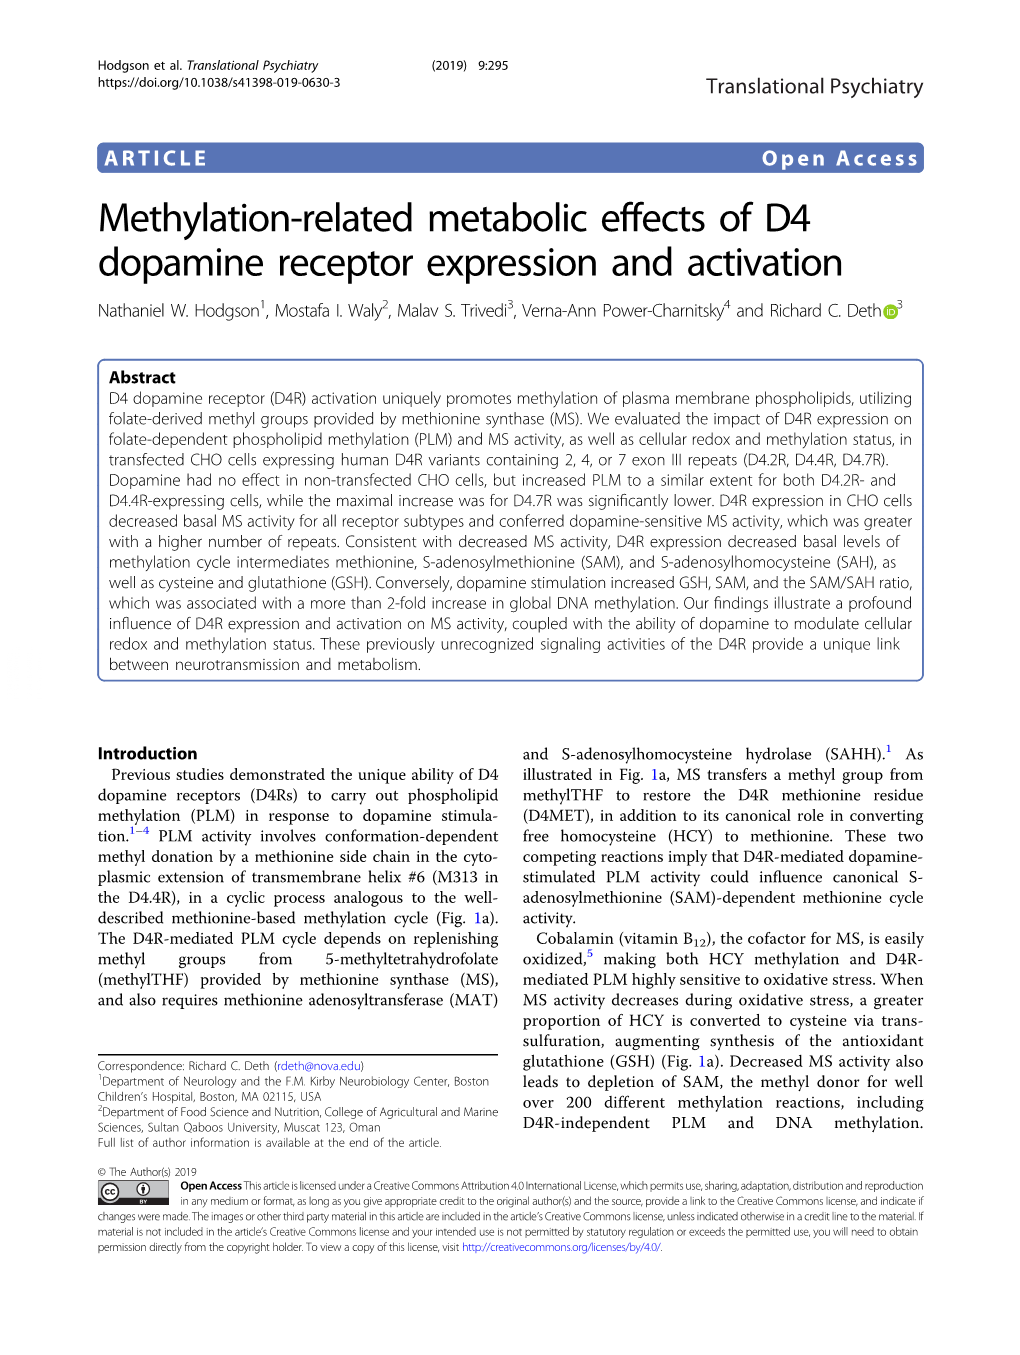 Methylation-Related Metabolic Effects of D4 Dopamine Receptor Expression and Activation Nathaniel W